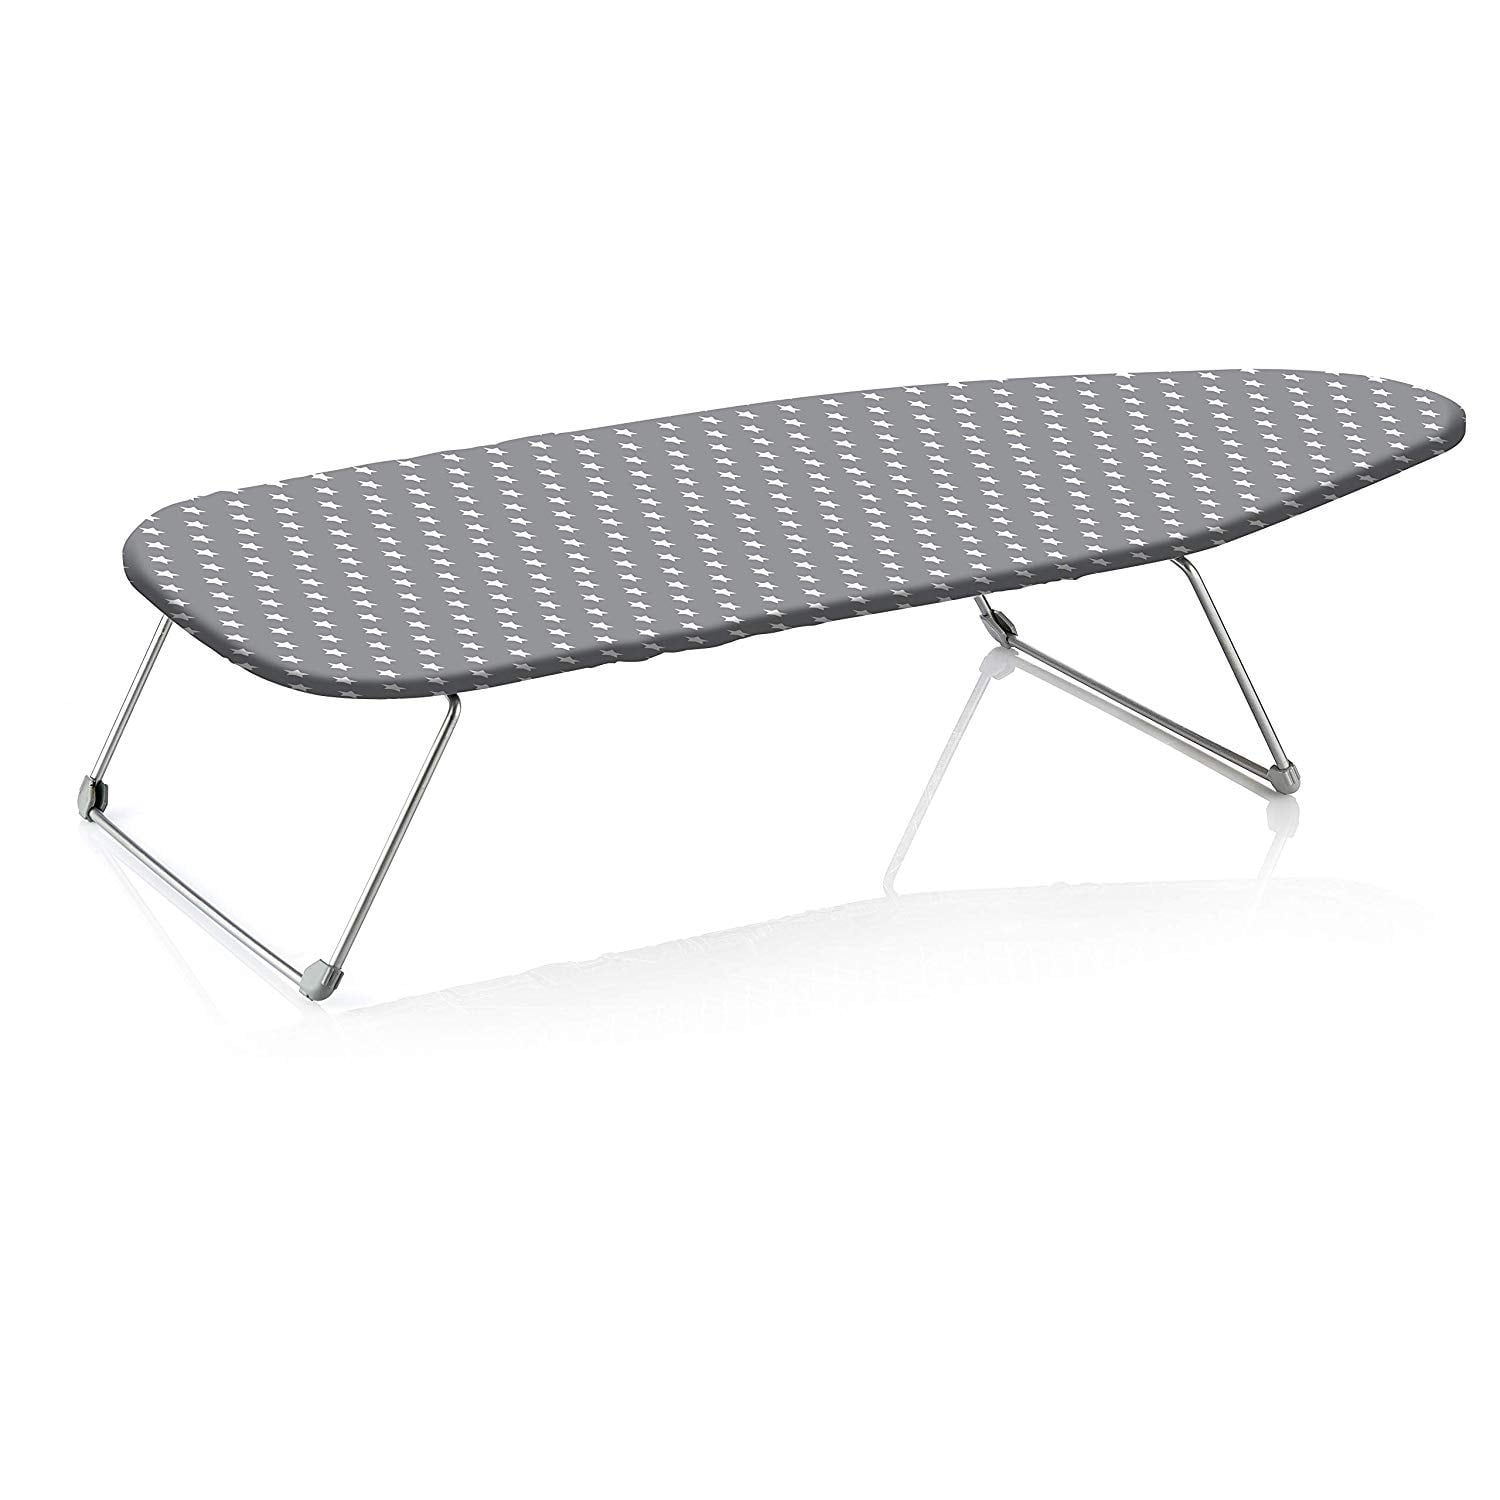 Basics Tabletop Ironing Board with Folding Legs Geometric Removable Cover